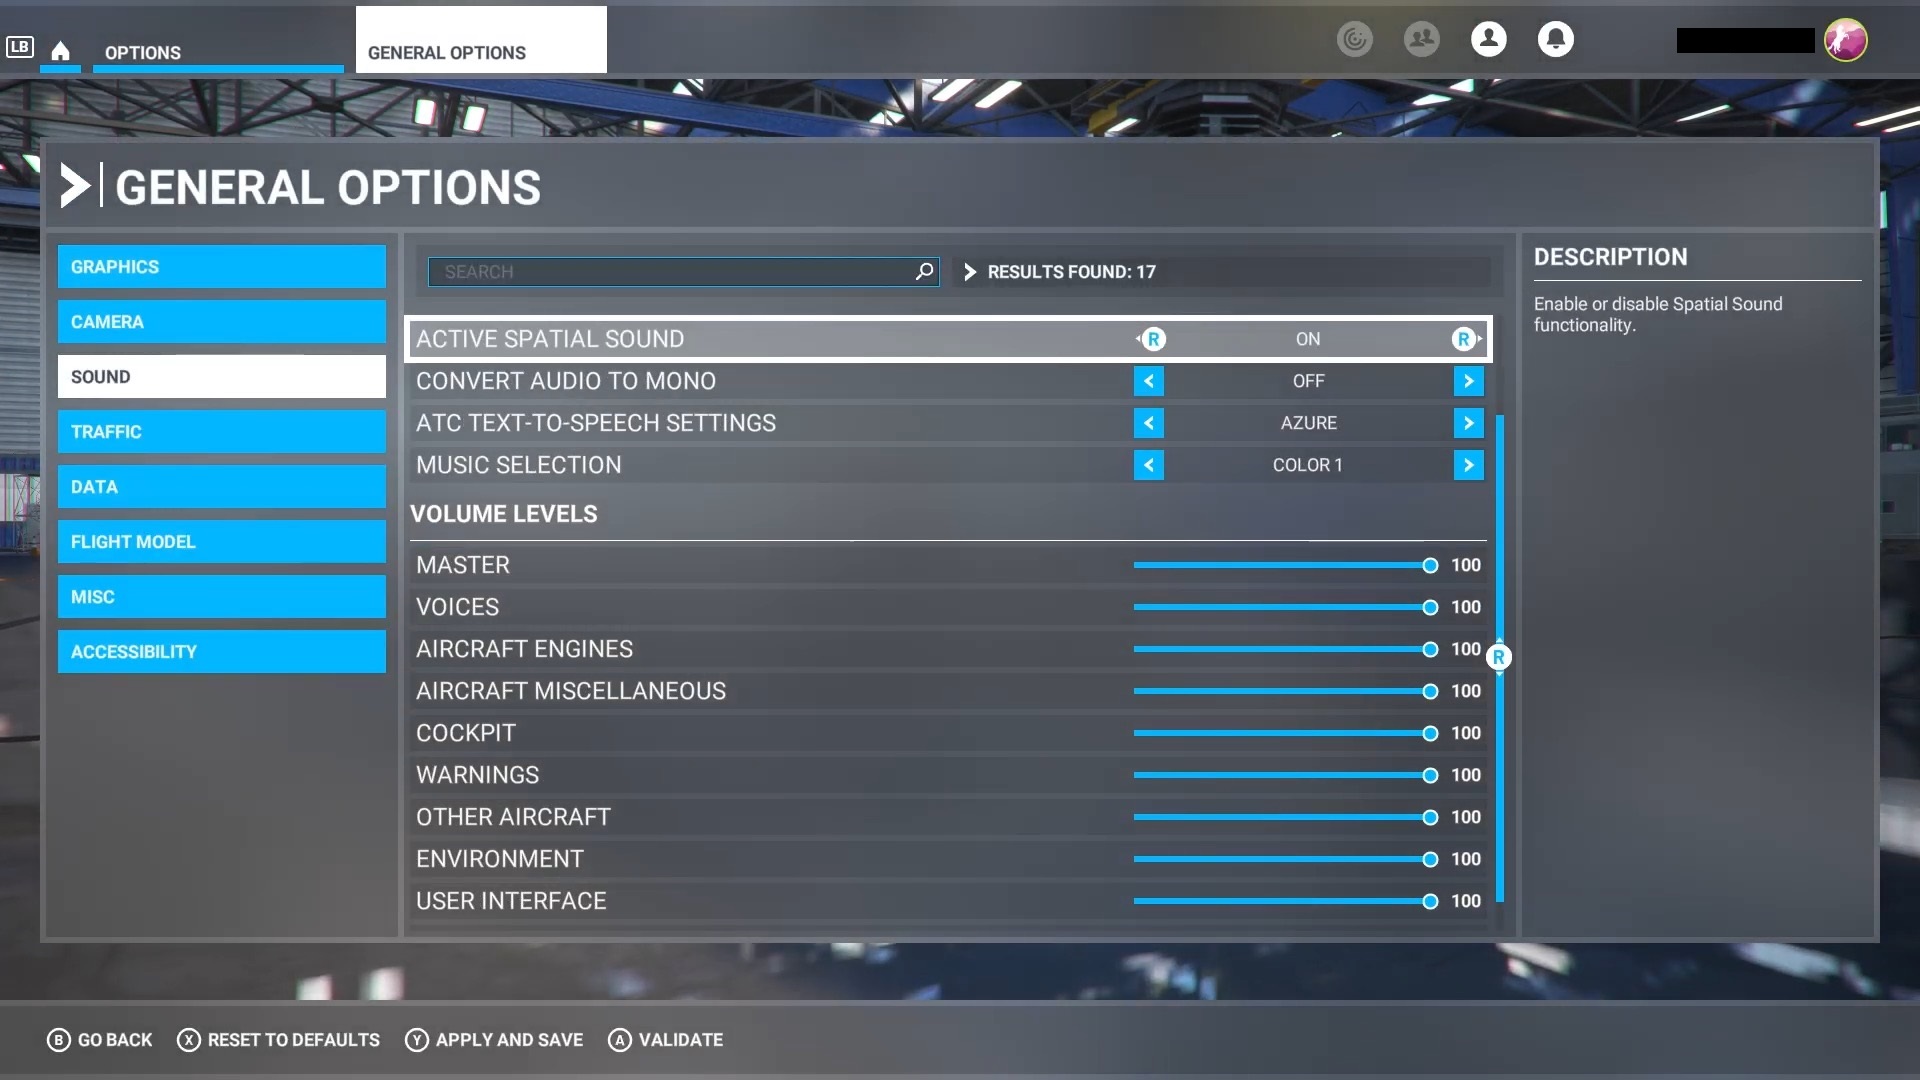 Screenshot of Flight Simulator general options menu with option to enable active spatial sound.